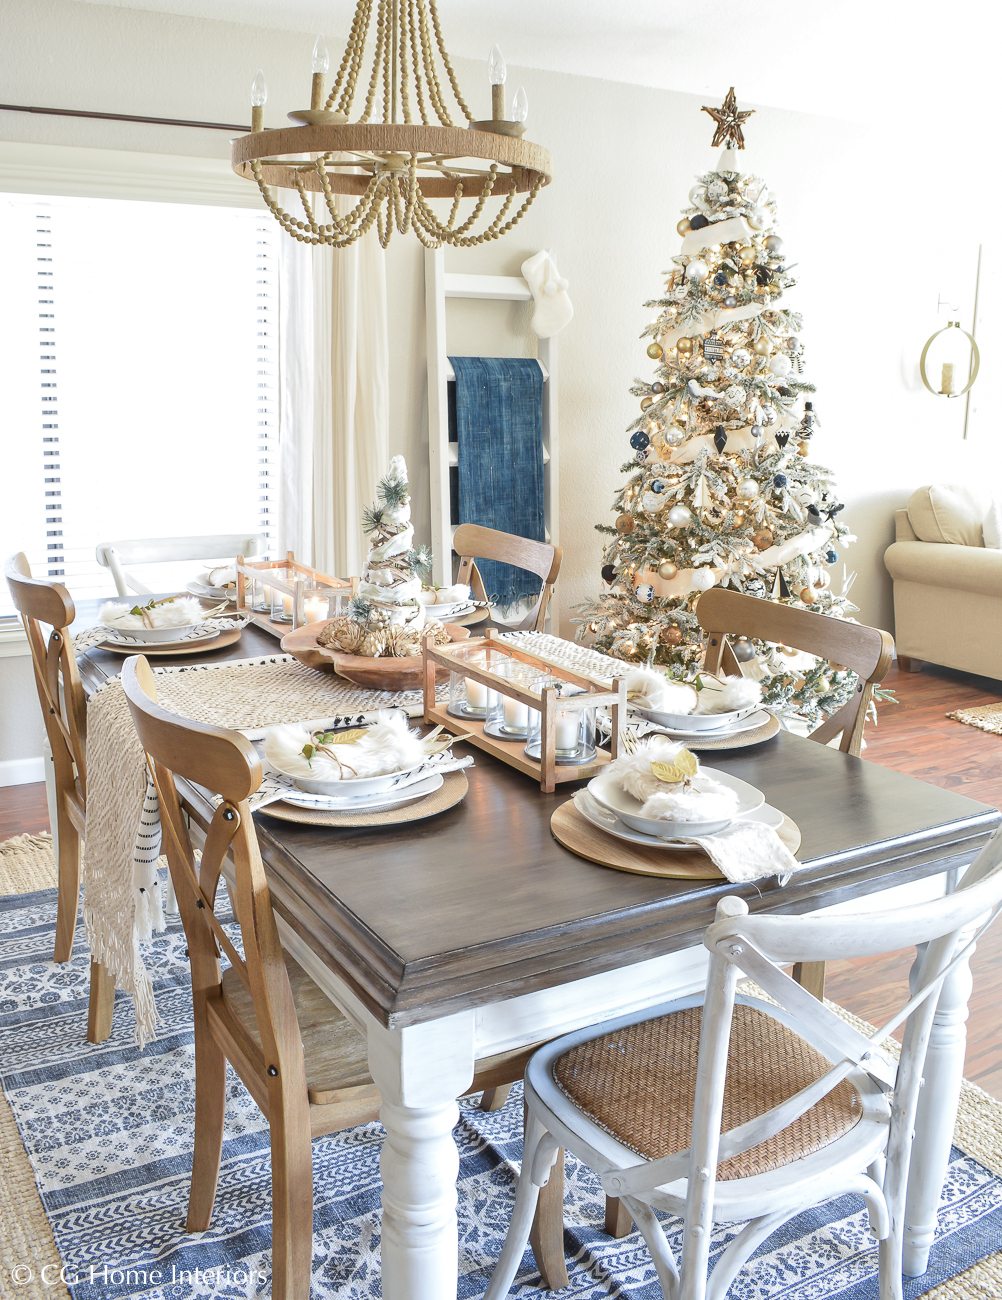 Create a beautiful holiday table!